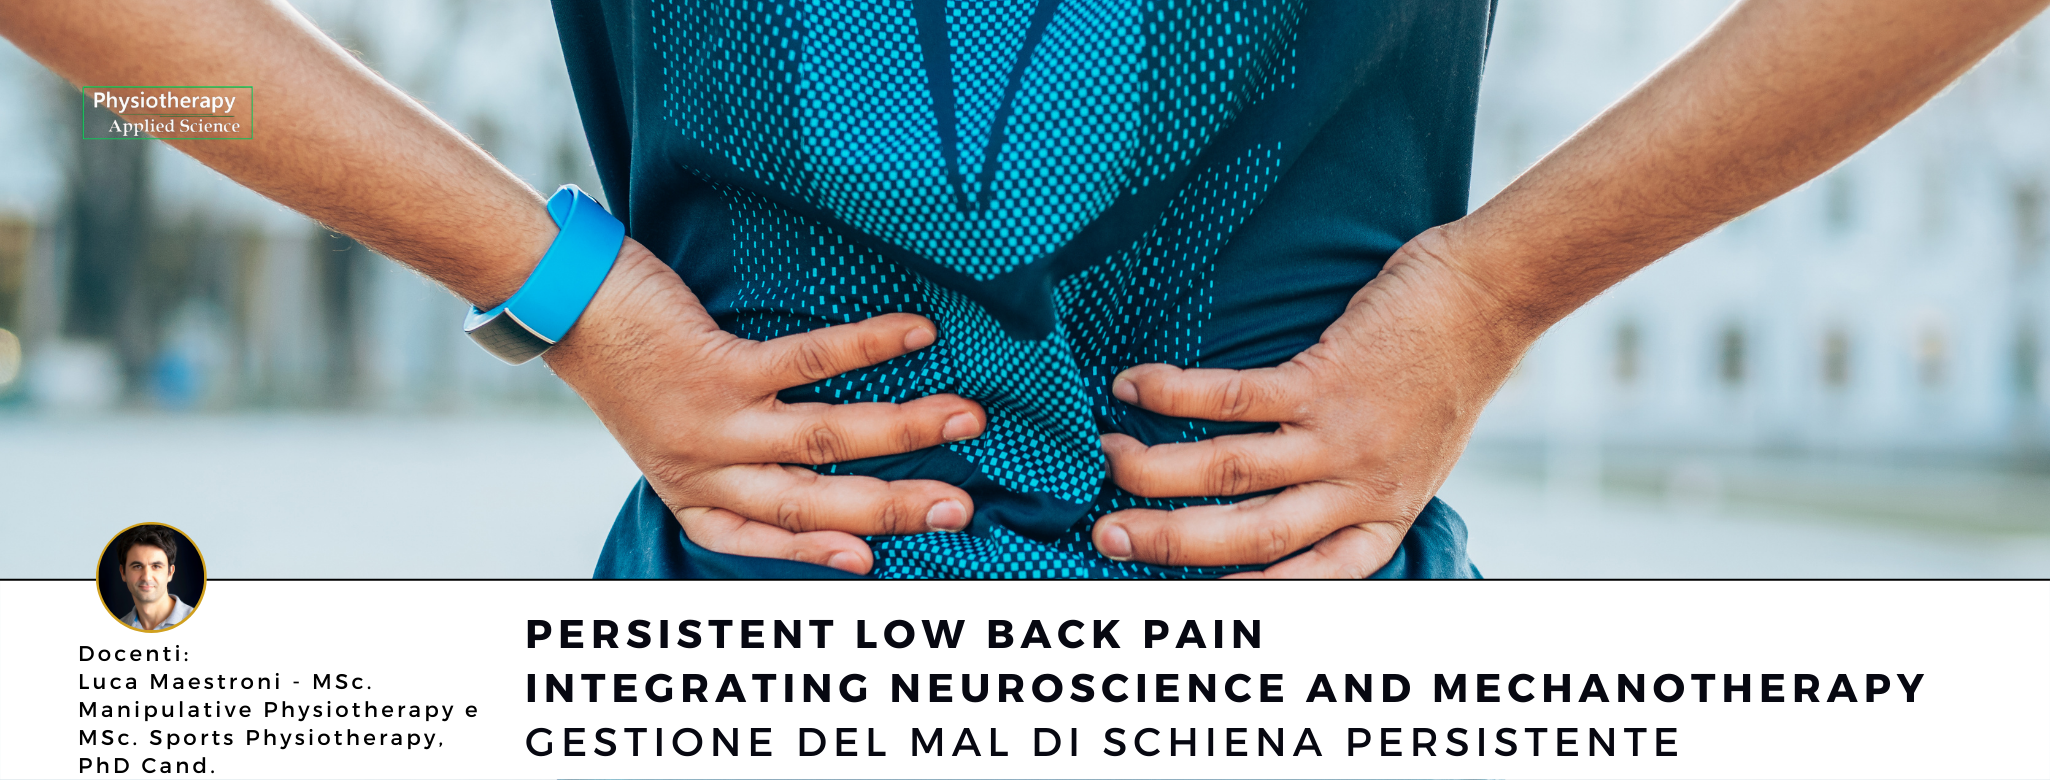 PERSISTENT LOW BACK PAIN